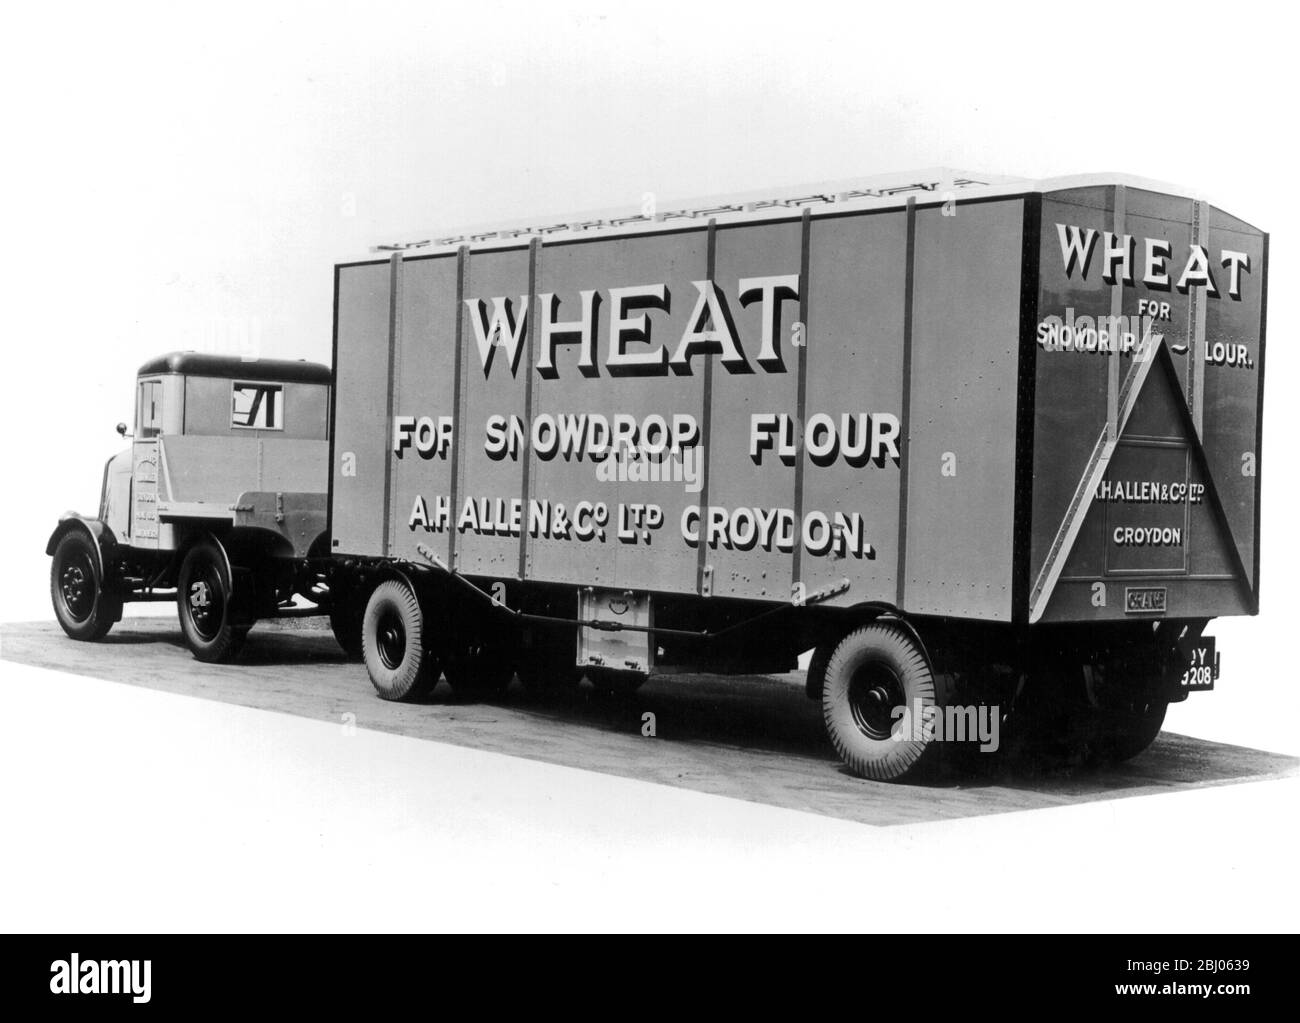 Aluminium Alloy grain Hopper In 15 years this machine has transported 15,000 tons of wheat. - 26th January 1950 Stock Photo